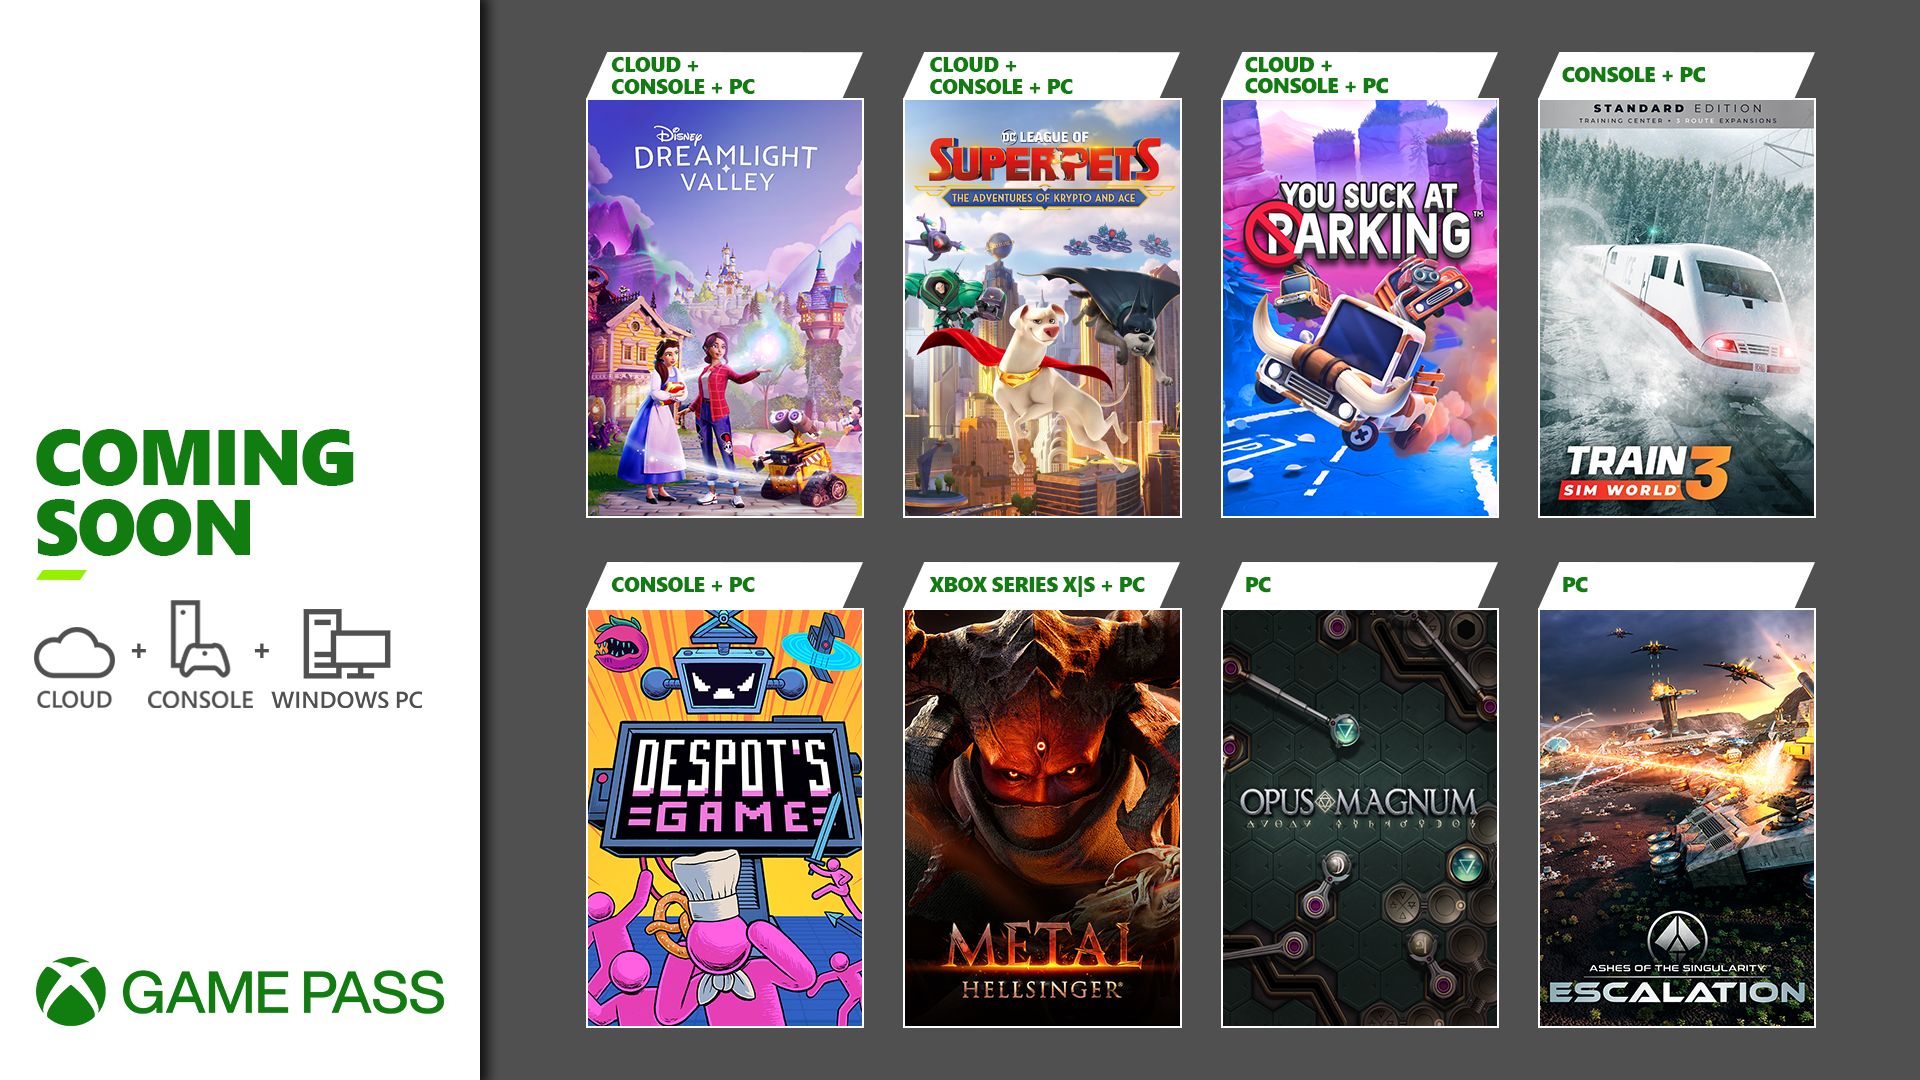 Xbox Head Credits Game Pass Service for Increased Engagement – The